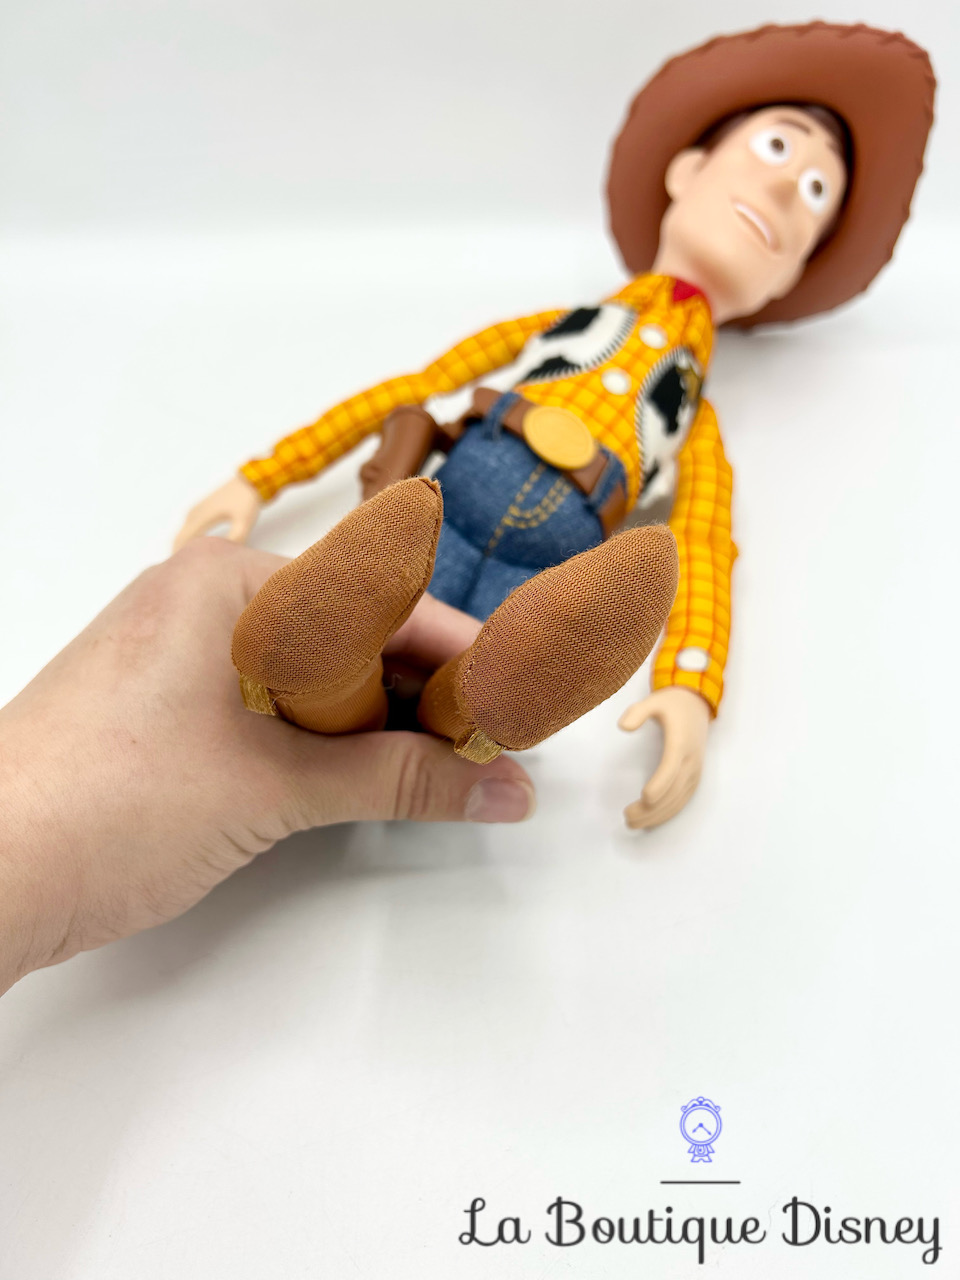 TOY STORY Figurine Parlante Woody 40cm - Cdiscount Jeux - Jouets